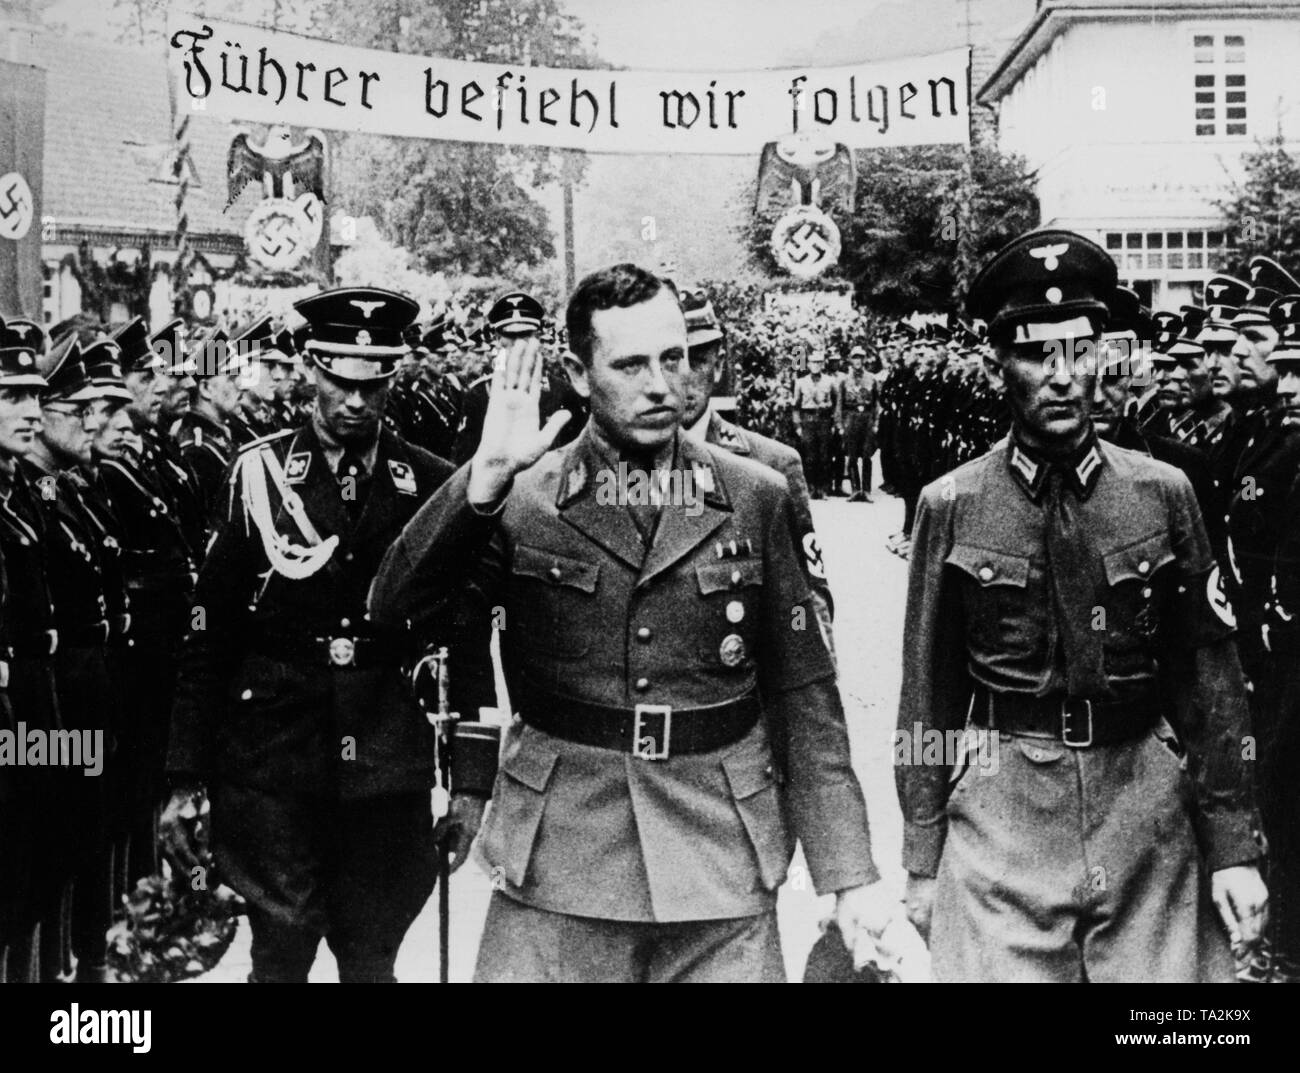 Albert Forster, the Nazi Gauleiter of Gdansk, (middle) takes the salute of members of the SS-Heimwehr Gdansk, SS-Wachsturmbann Eimann during a meeting of the District Leader of the NSDAP in the Free City of Gdansk. On a banner stands the slogan: 'Fuehrer befiehl-wir folgen!' ('The Fuehrer commands, we follow'), behind it the Nazi sovereignty symbols of the German Reich. Stock Photo